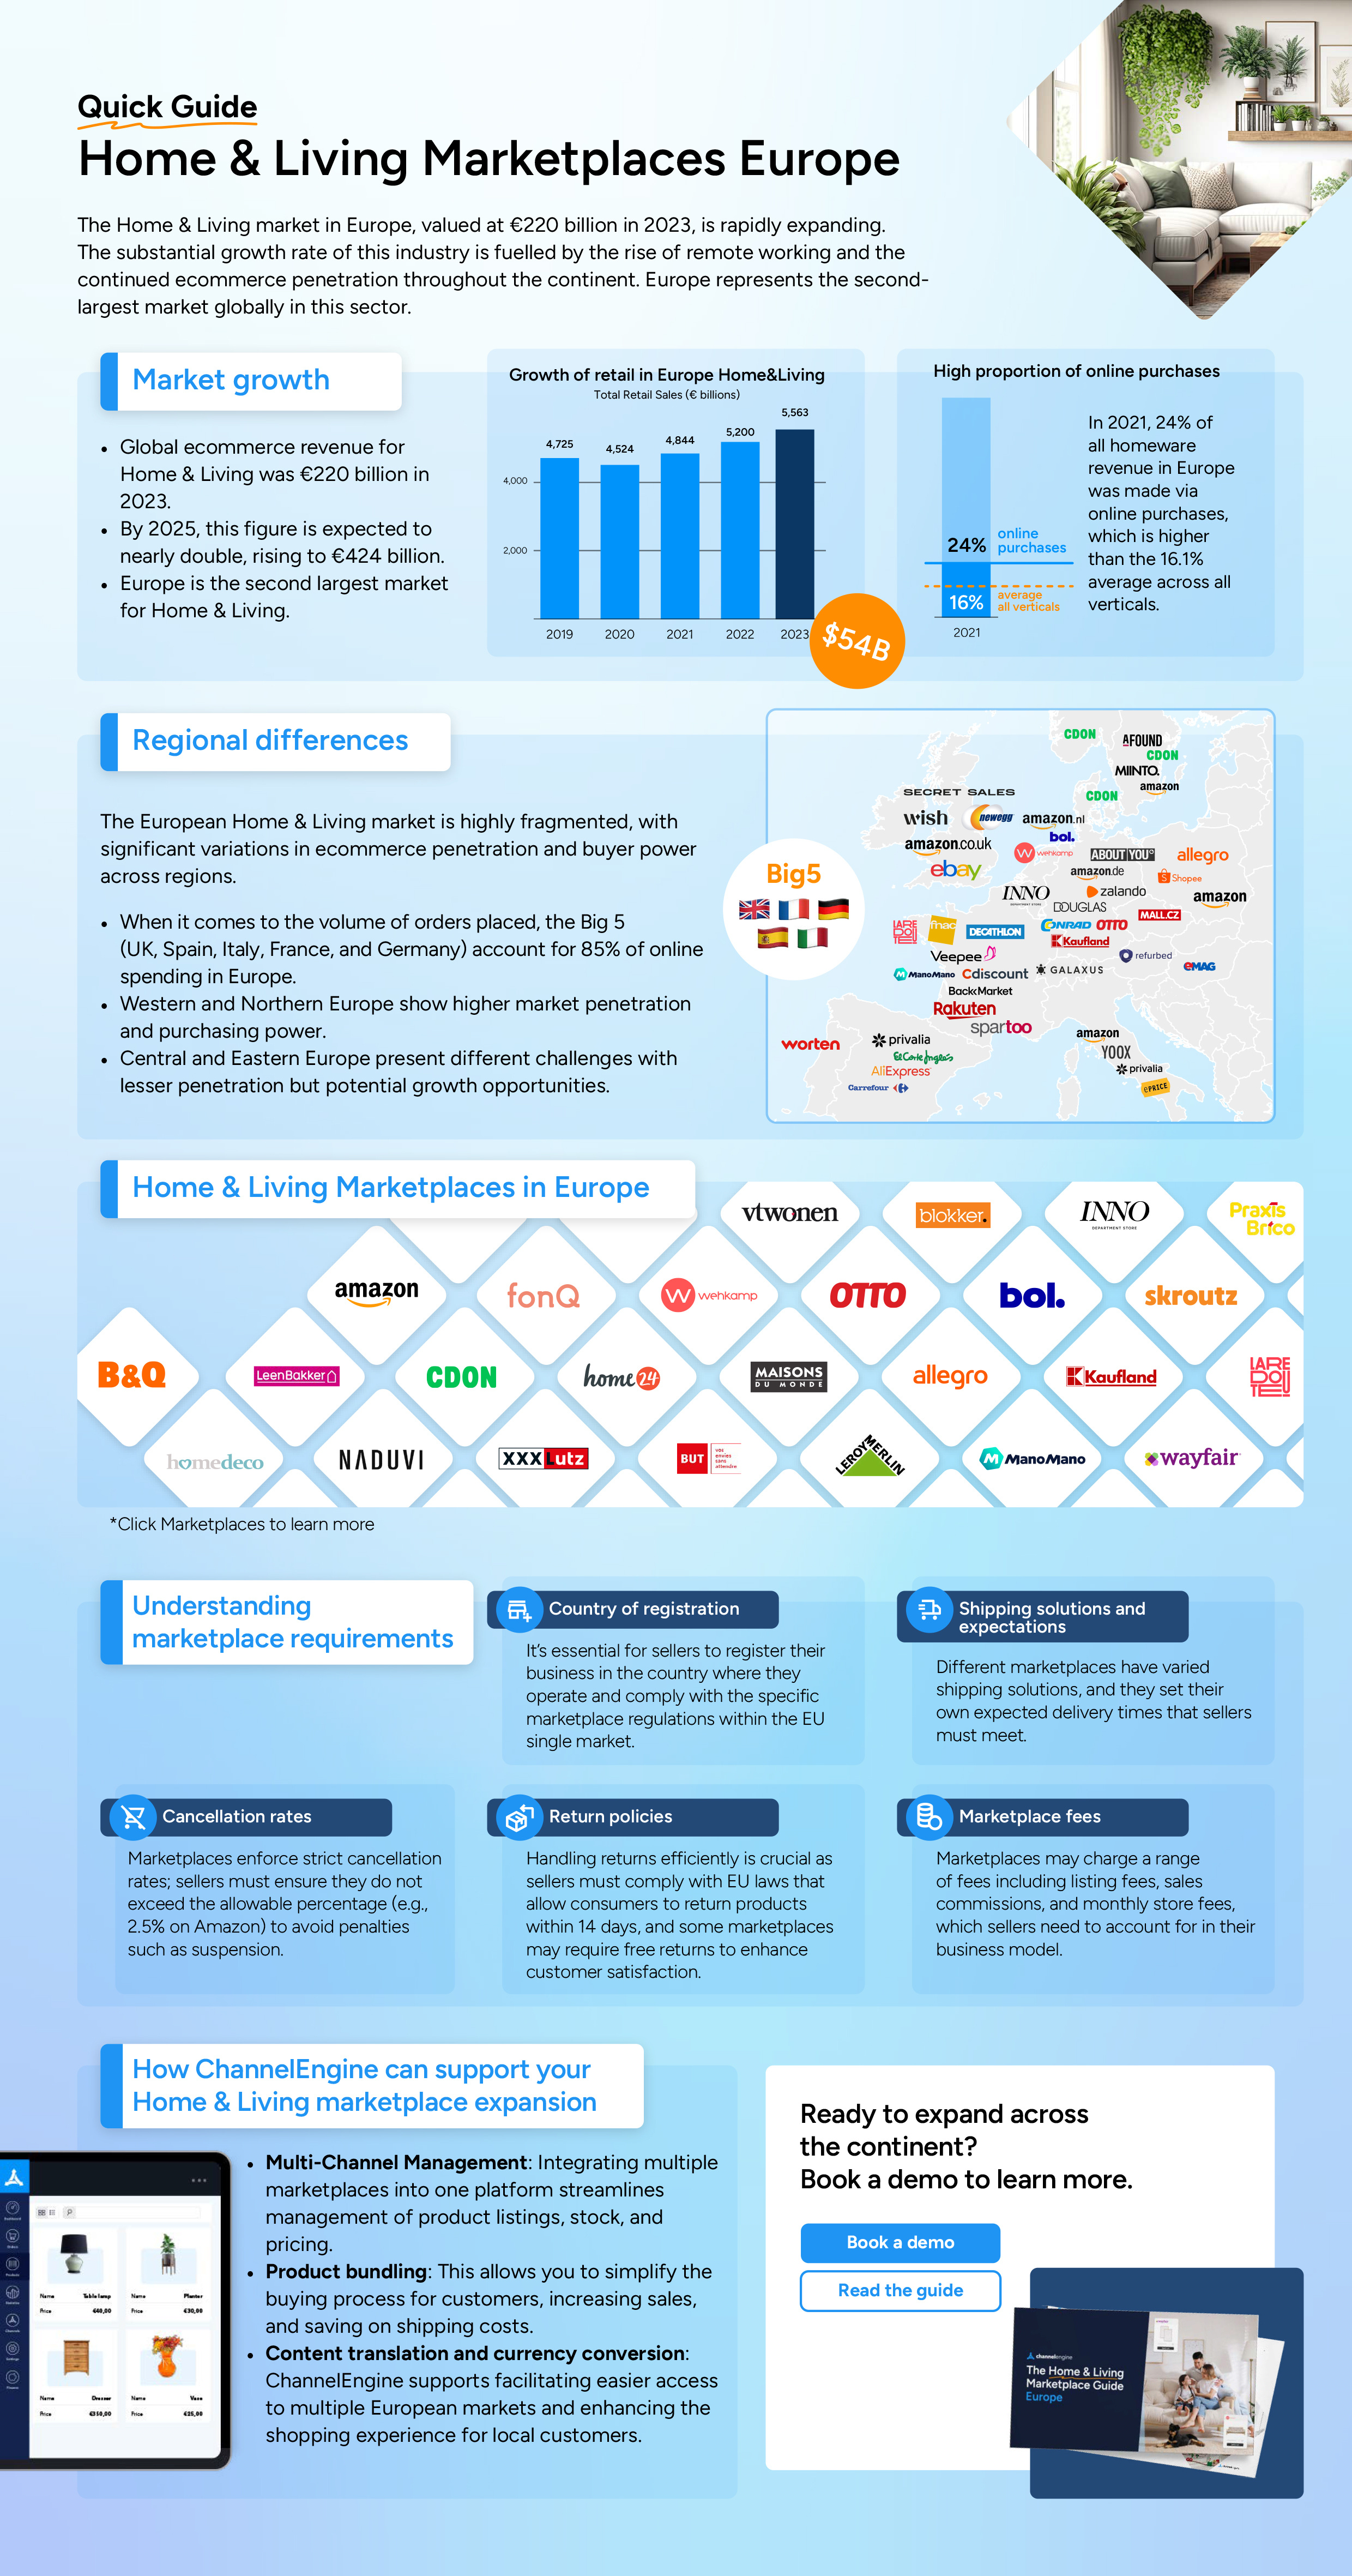 Quick Guide - Home and Living Marketplaces Europe - ChannelEngine